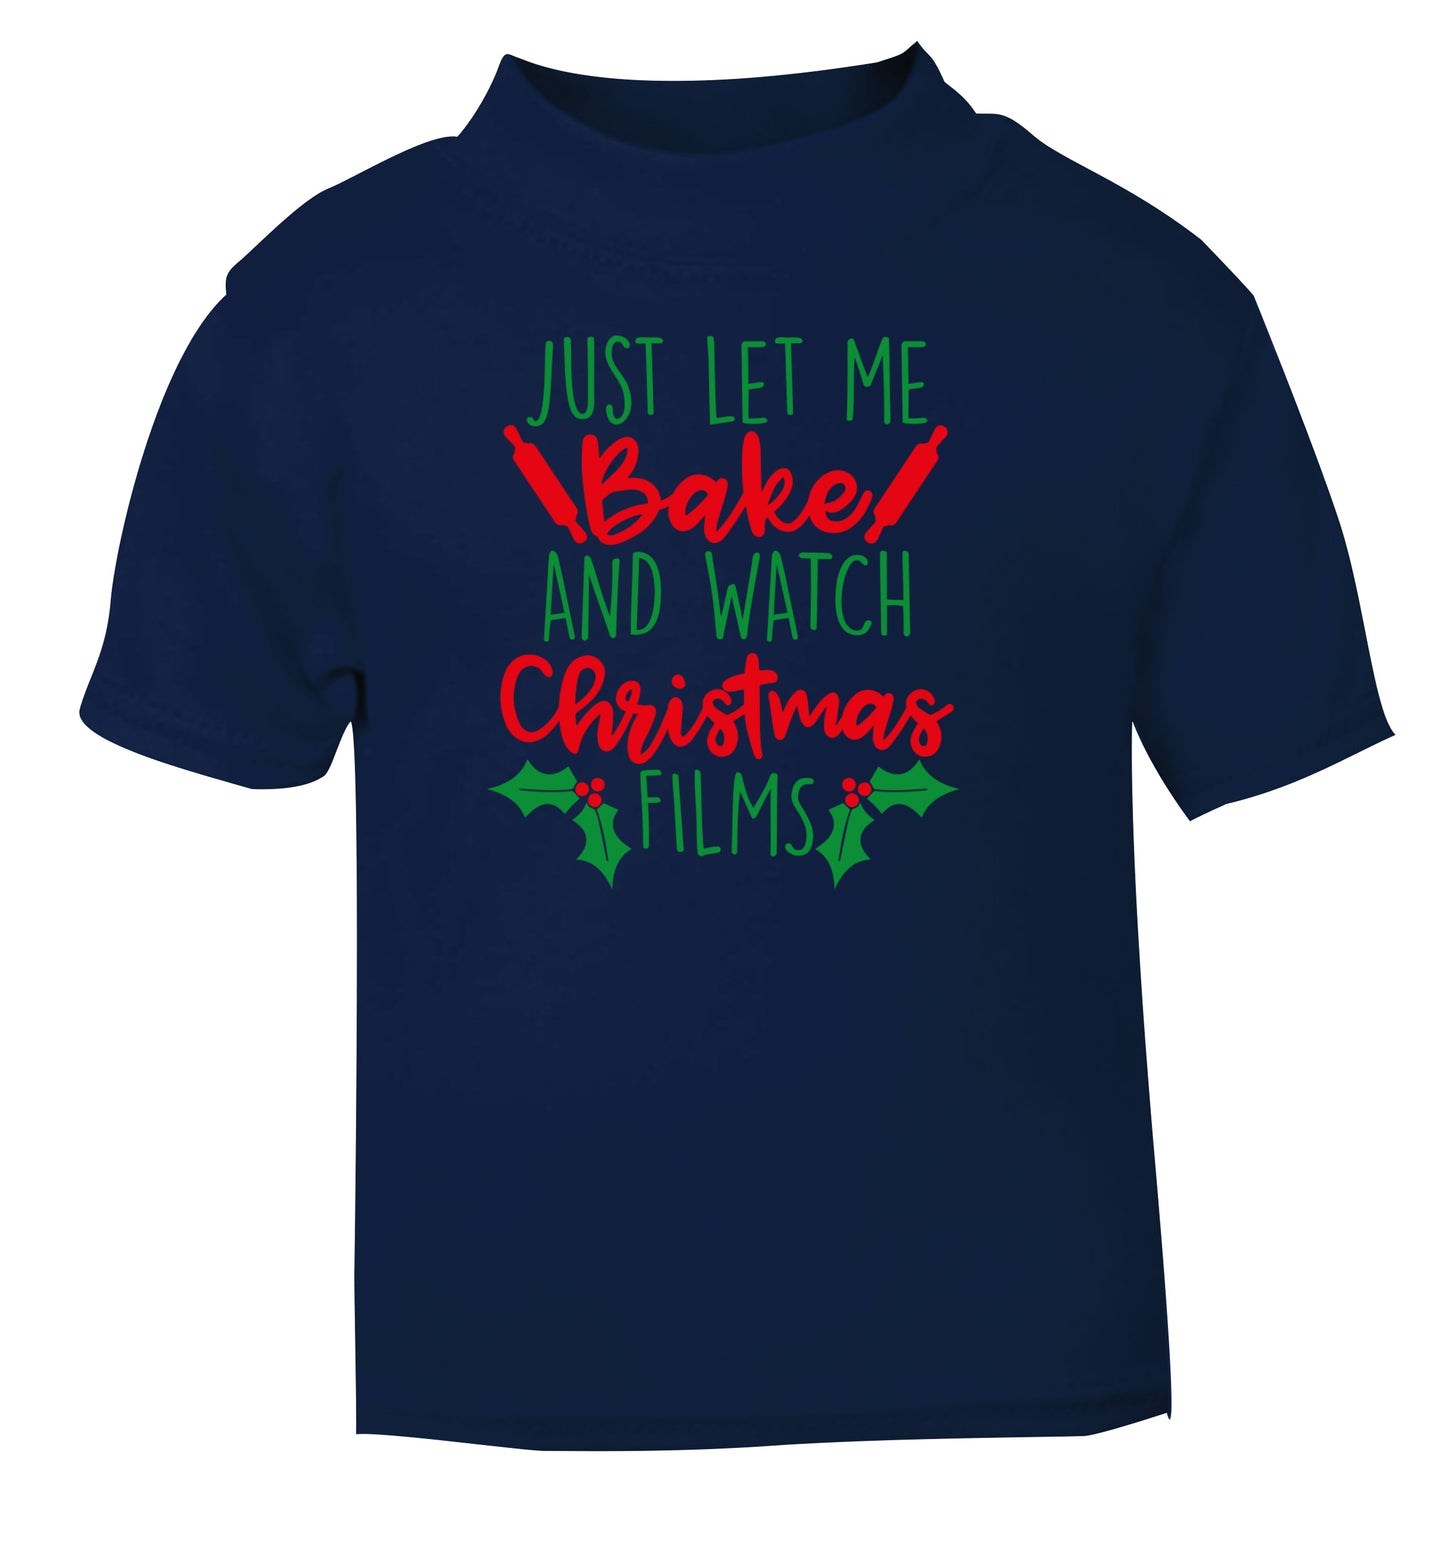 Just let me bake and watch Christmas films navy Baby Toddler Tshirt 2 Years